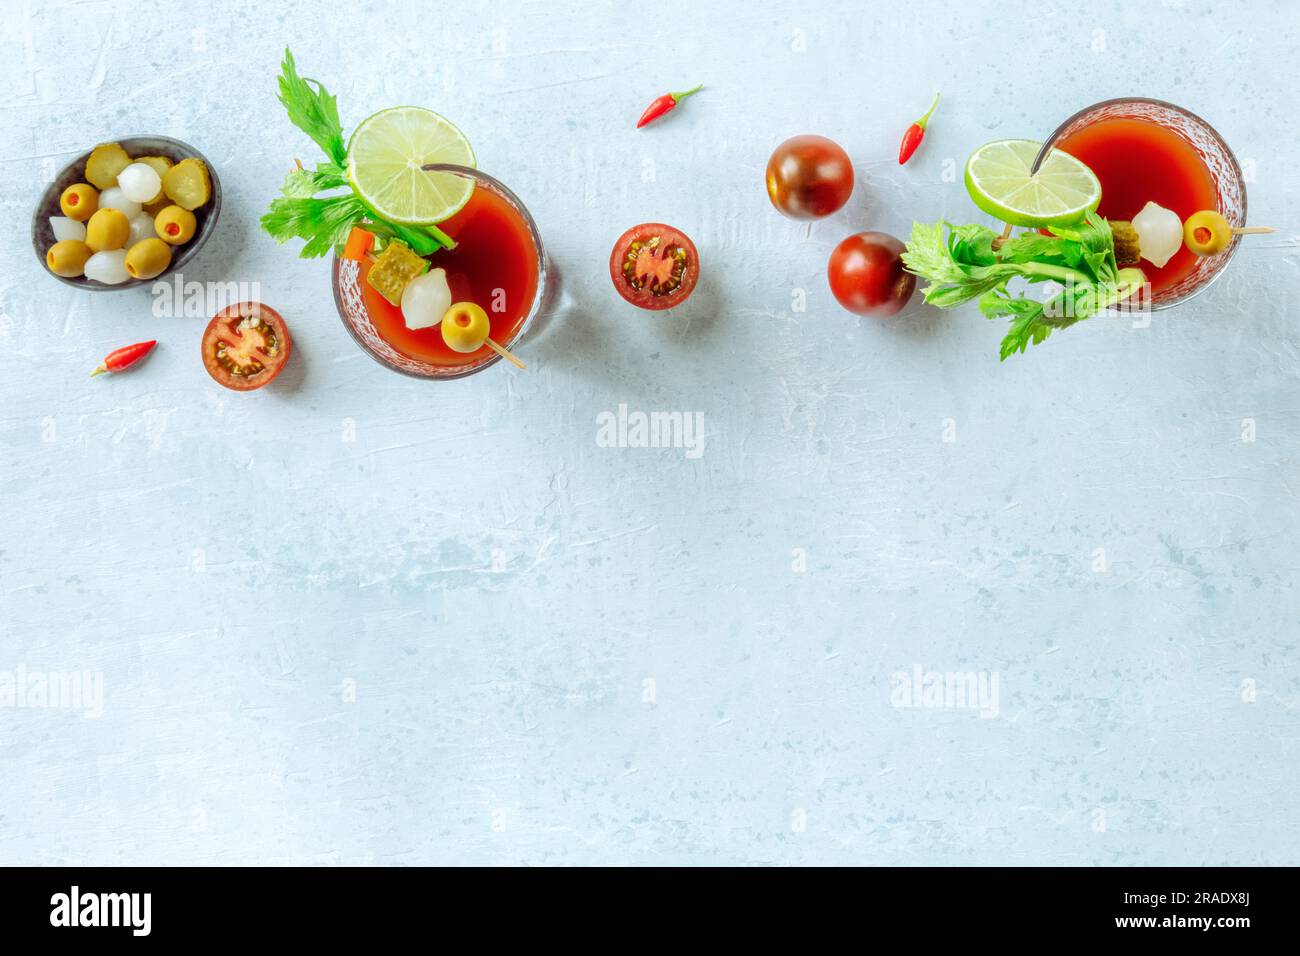 https://c8.alamy.com/comp/2RADX8J/bloody-mary-cocktail-with-garnish-shot-from-above-with-copy-space-spicy-tomato-juice-with-alcohol-lime-pickles-celery-2RADX8J.jpg